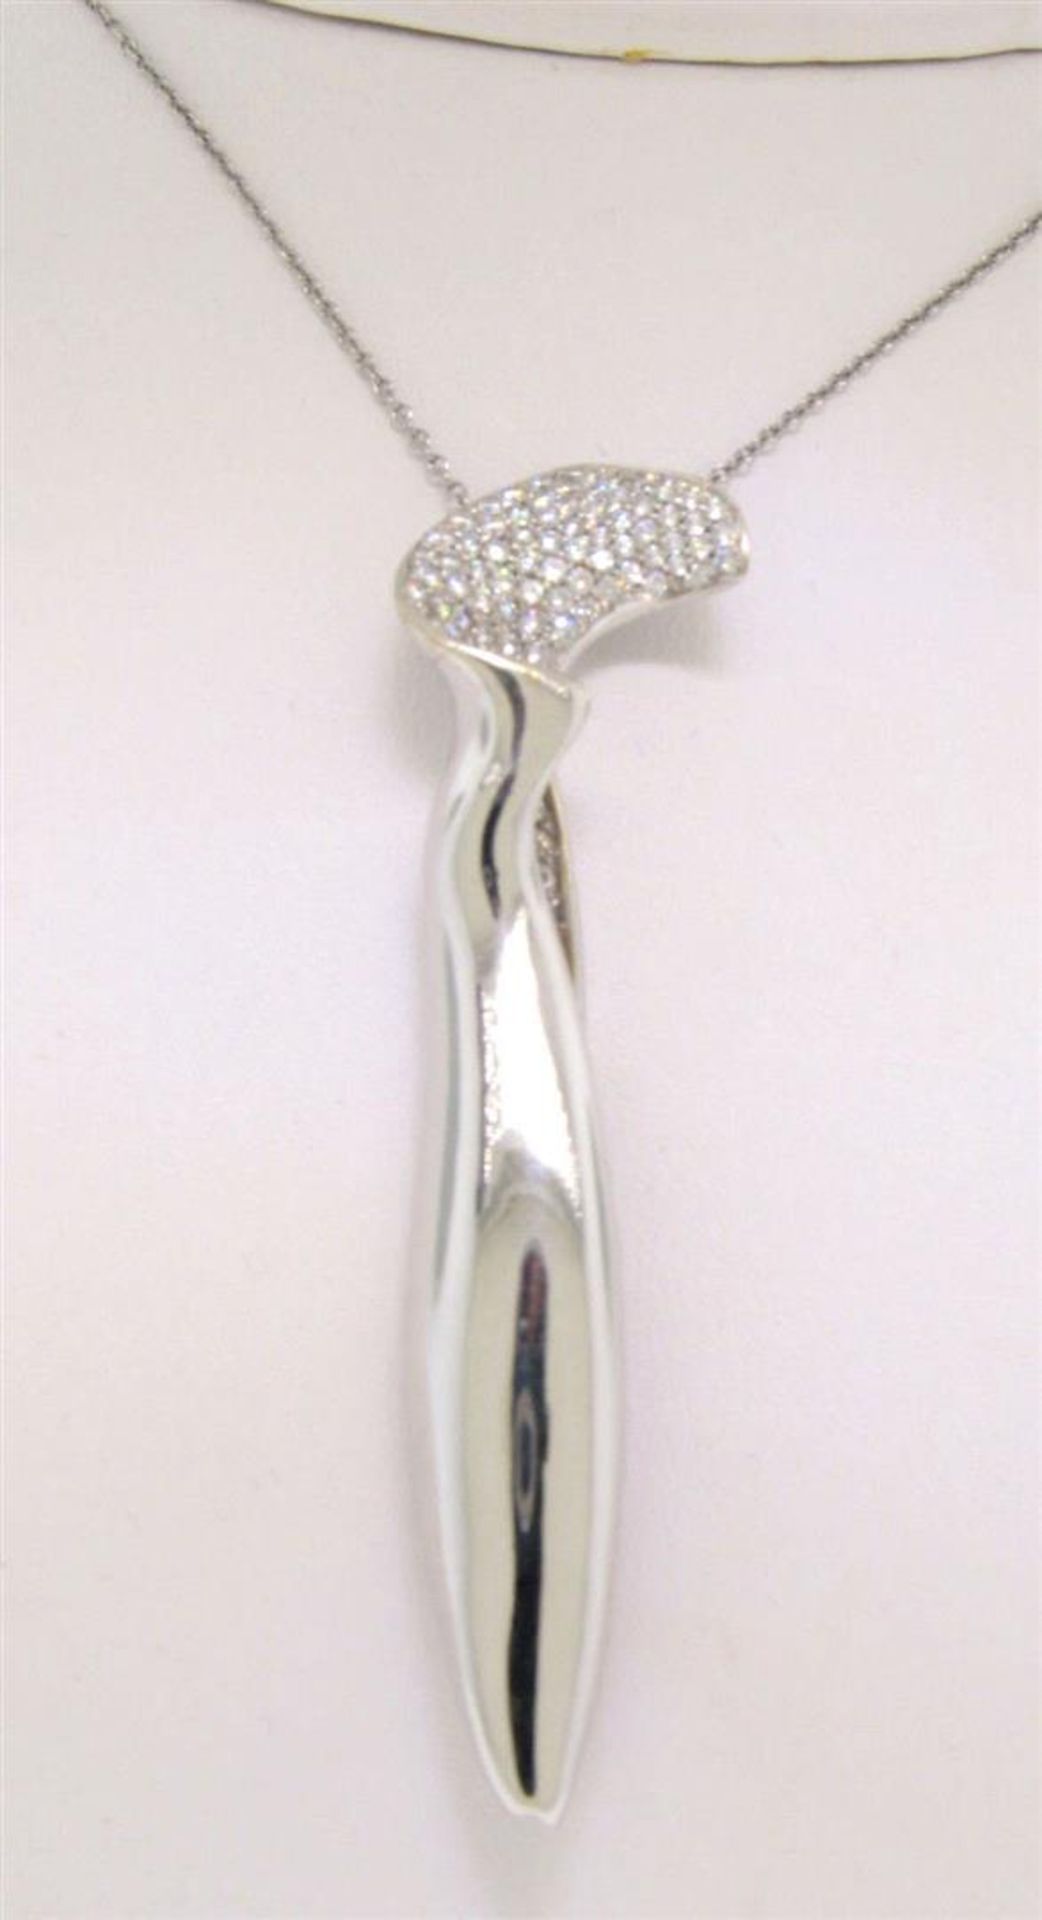 Tiffany & Co. Frank Gehry 16" 18k White Gold Orchid Diamond Pendant Necklace - Image 3 of 8